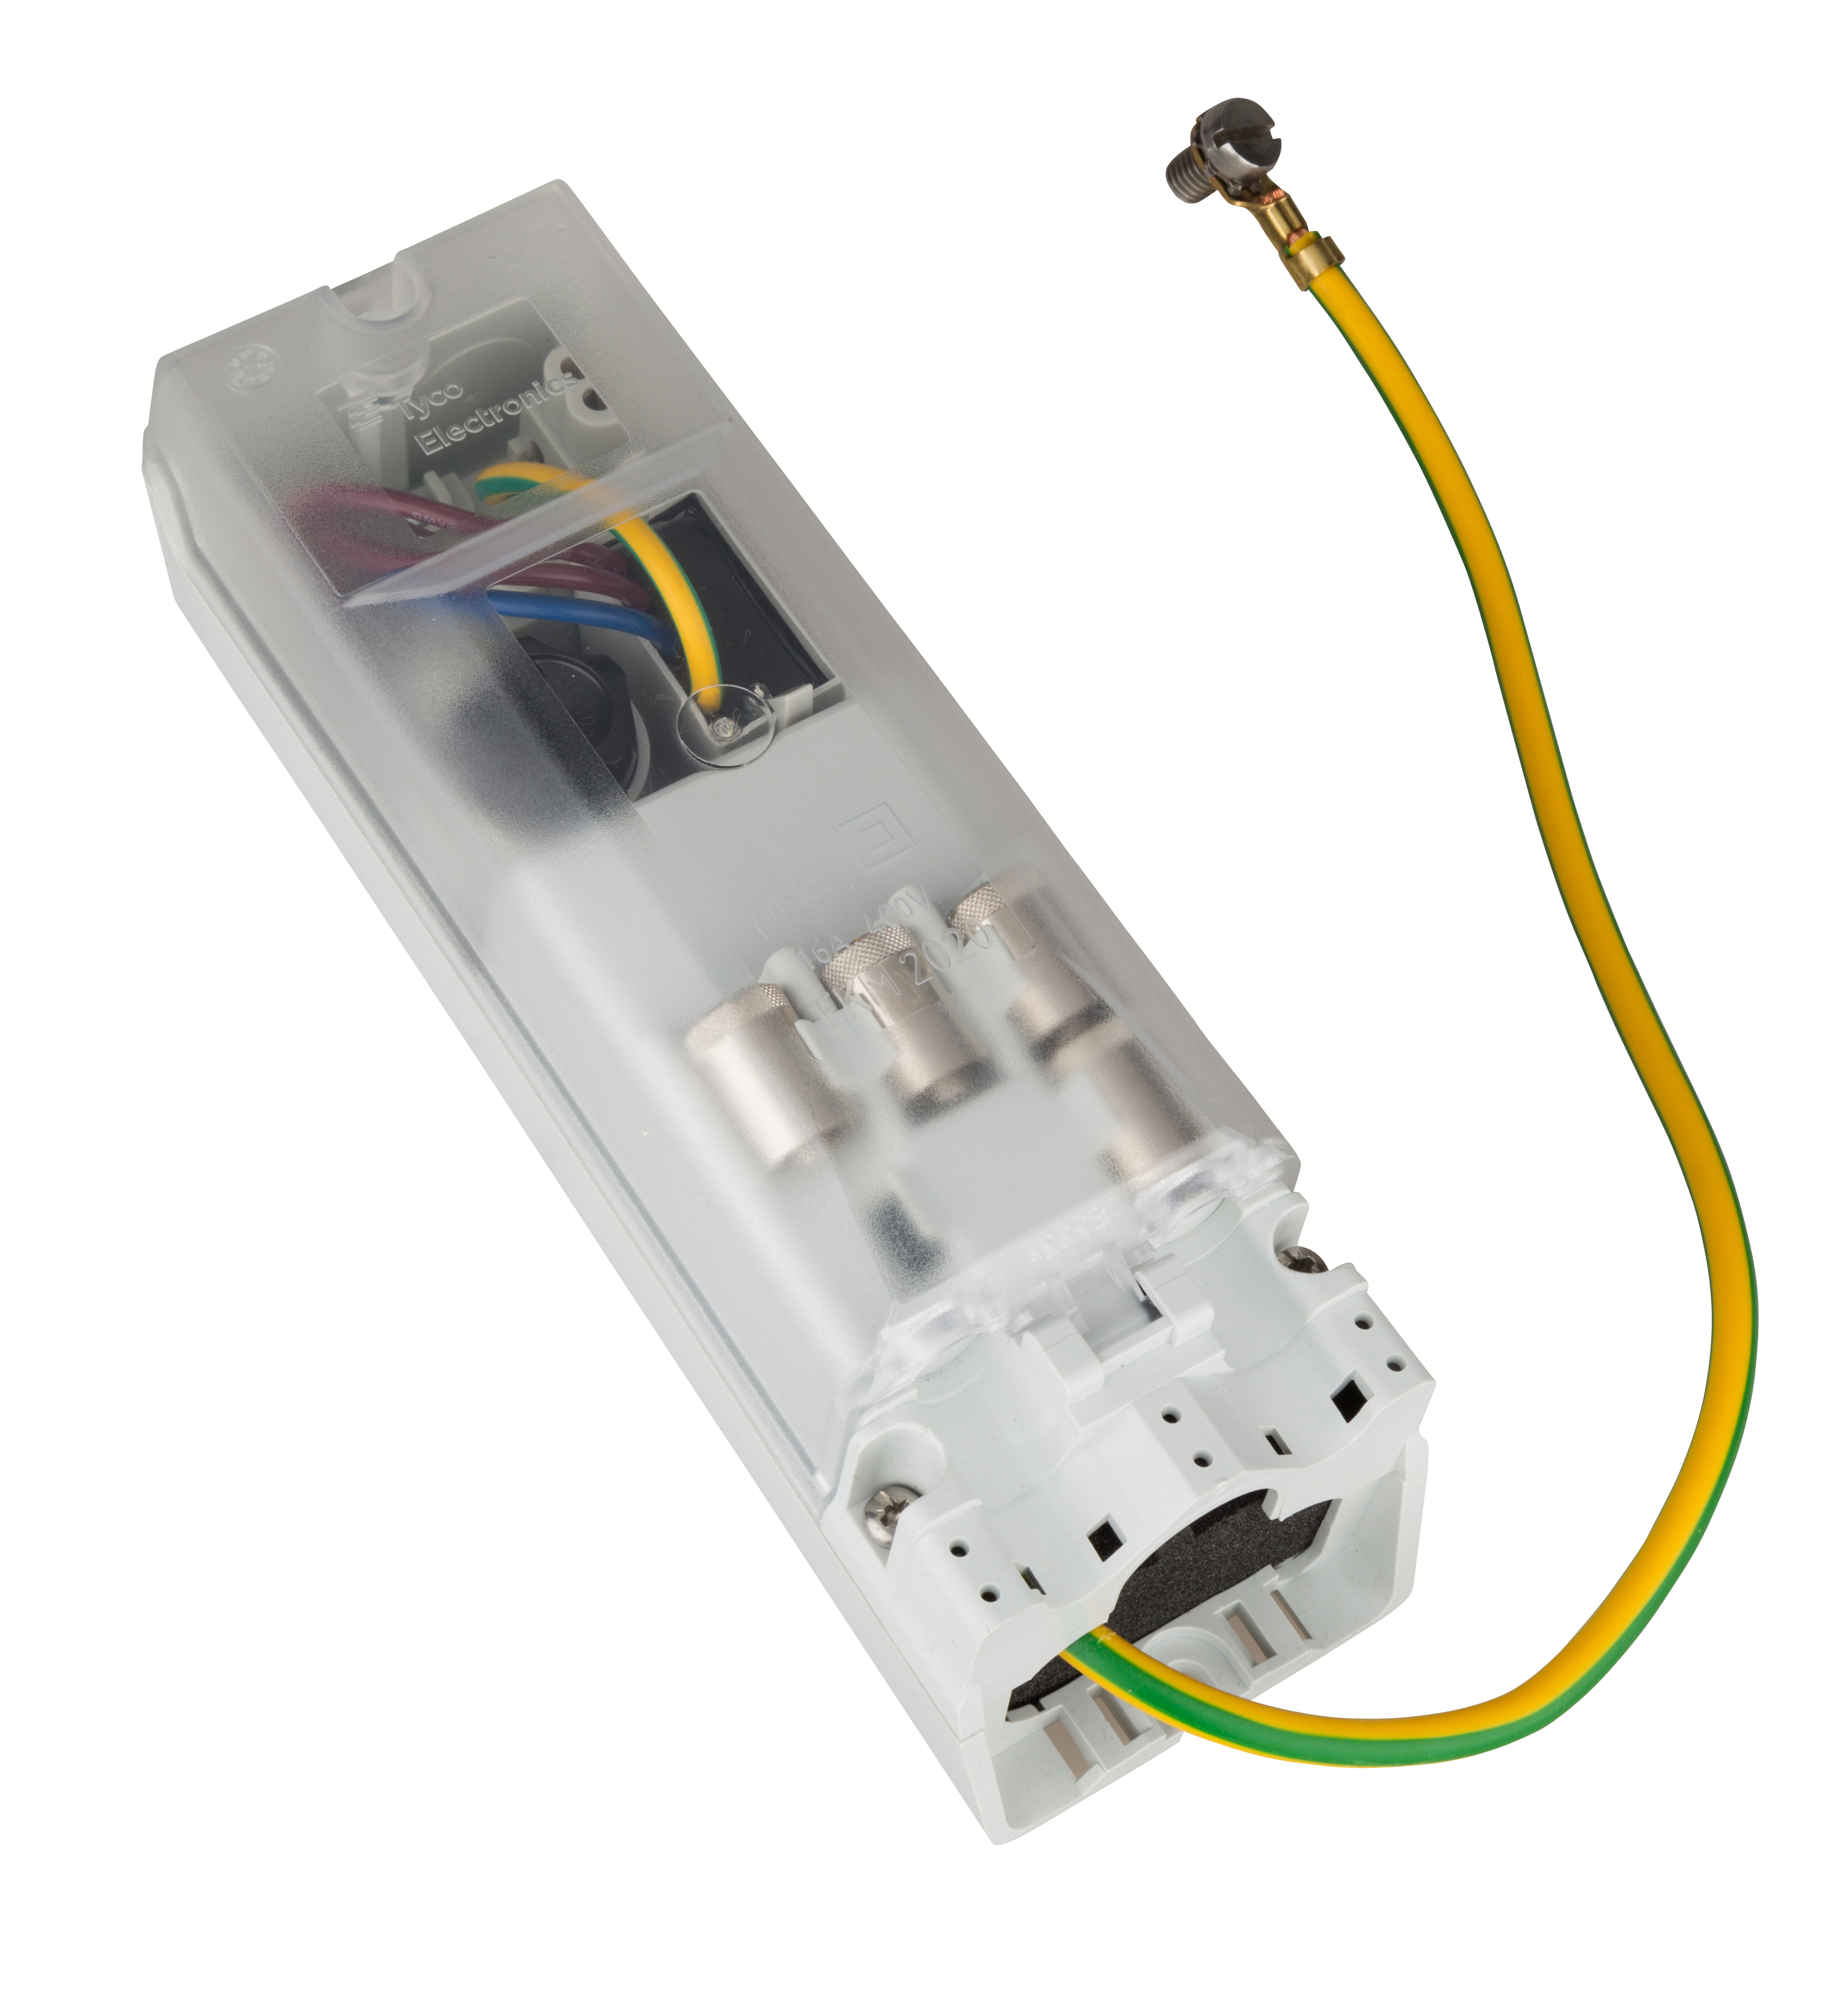 EKM 2020 Pole fuse box with SPD T2 + T3 for cable 5x16